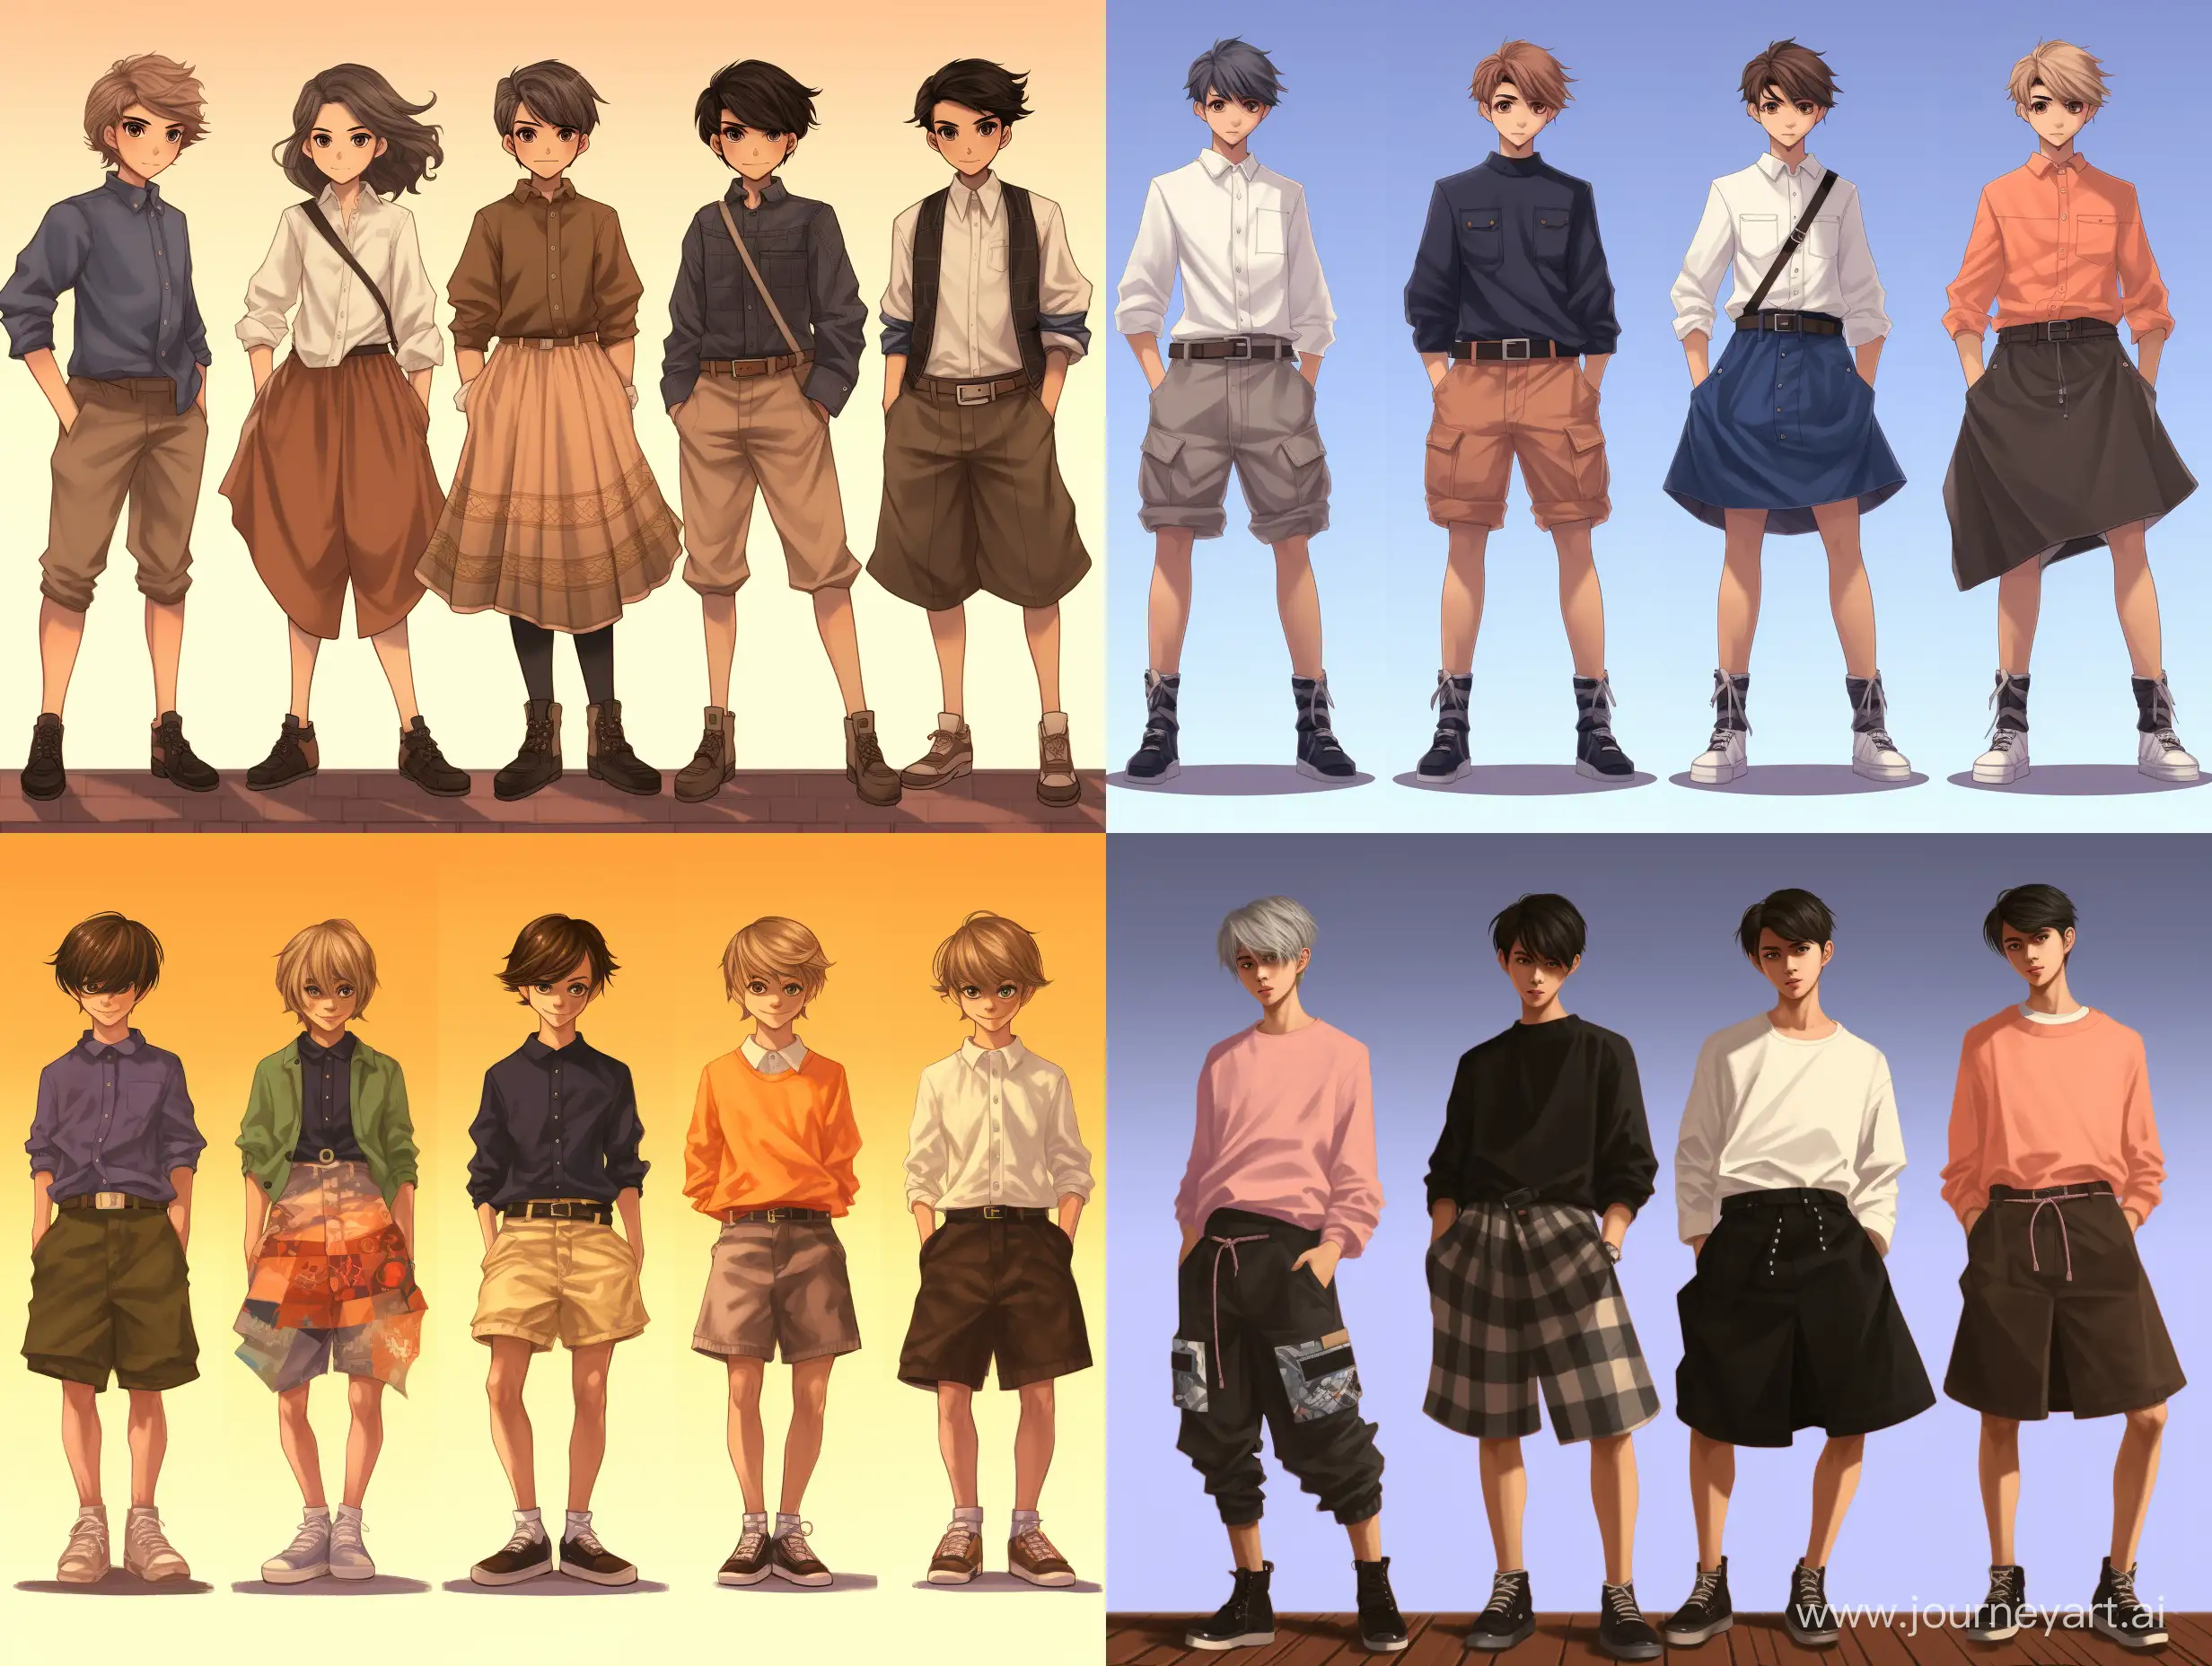 Playful-Boys-in-JK-Skirts-Quirky-Fashion-Exploration